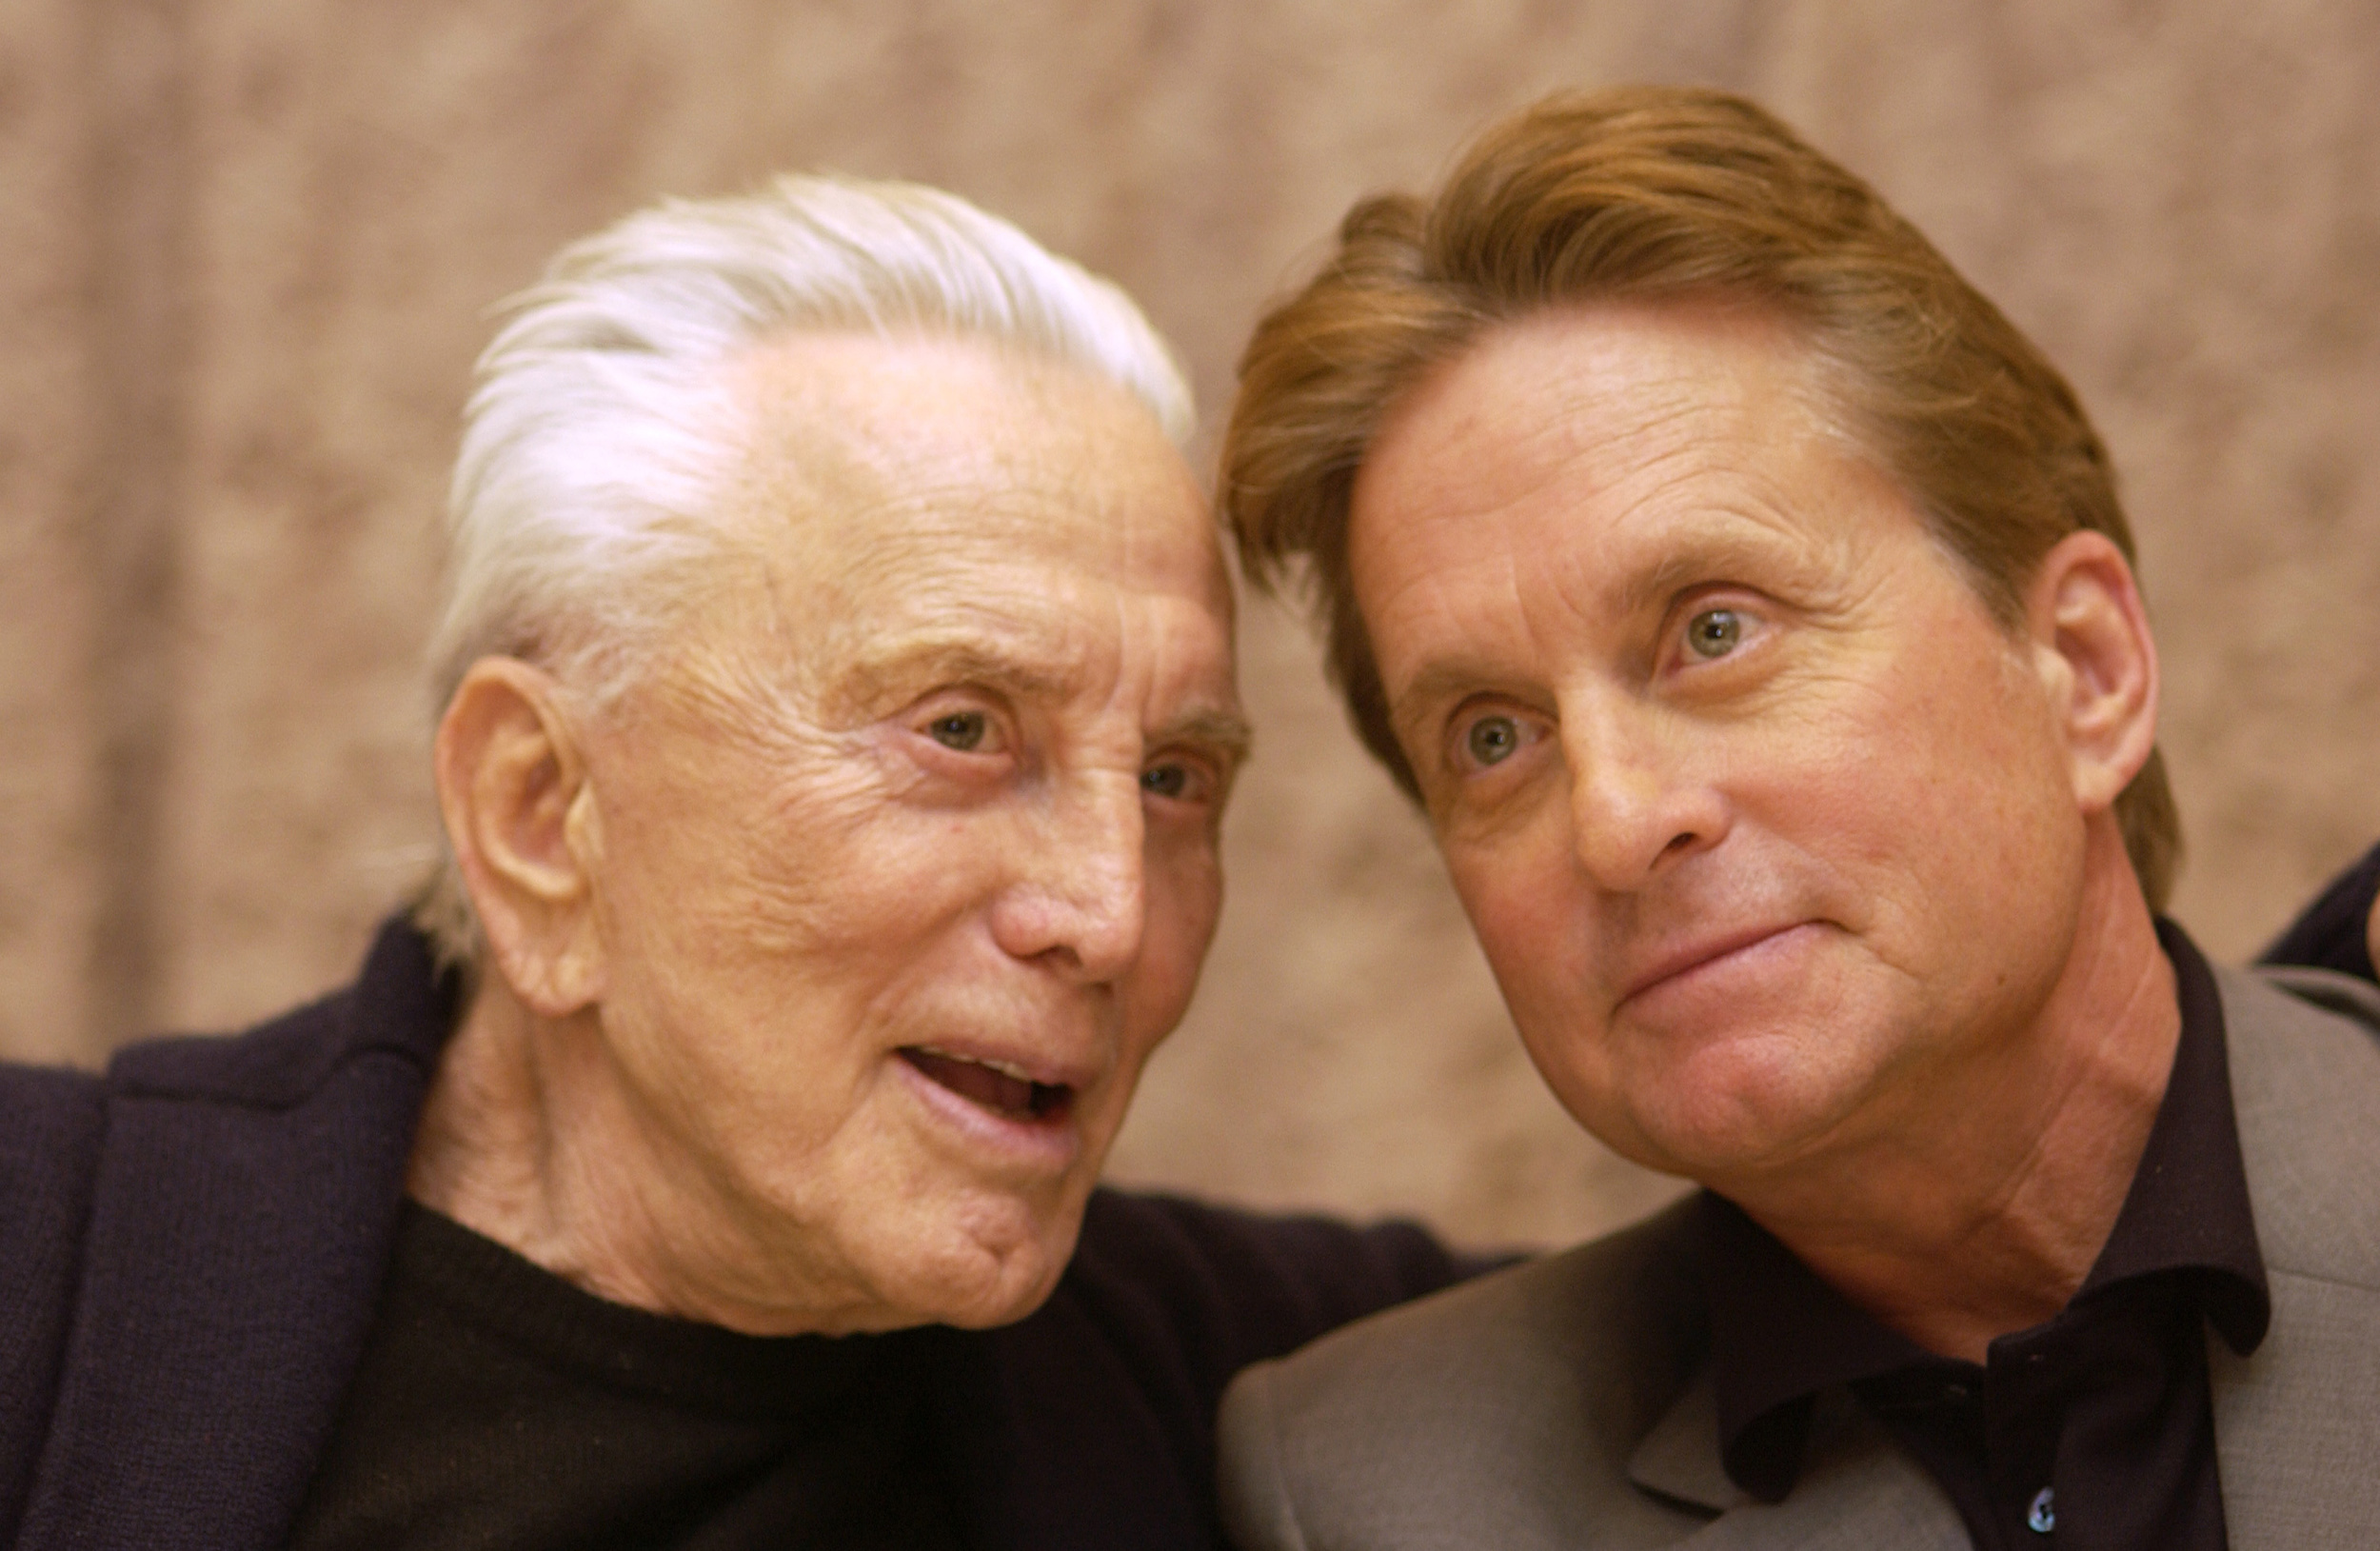 <p>Kirk and Michael Douglas were the closest thing to father-son Hollywood royalty. Kirk (<em>Champion, Detective Story</em>) passed away in February 2020 at 103 years old. Meanwhile, Michael won an Oscar for his role as corporate raider Gordon Gekko in Wall Street. He is remembered for starring in acclaimed films like <em>Romancing the Stone</em>, <em>Fatal Attraction,</em> and <em>The American President</em>. Not to be forgotten, Michael's mom, Diana, played Peg in the hit <em>Planes, Trains, and Automobiles</em>.</p><p>You may also like: <a href='https://www.yardbarker.com/entertainment/articles/movie_stars_who_had_small_tv_roles_before_they_were_famous/s1__30336368'>Movie stars who had small TV roles before they were famous</a></p>